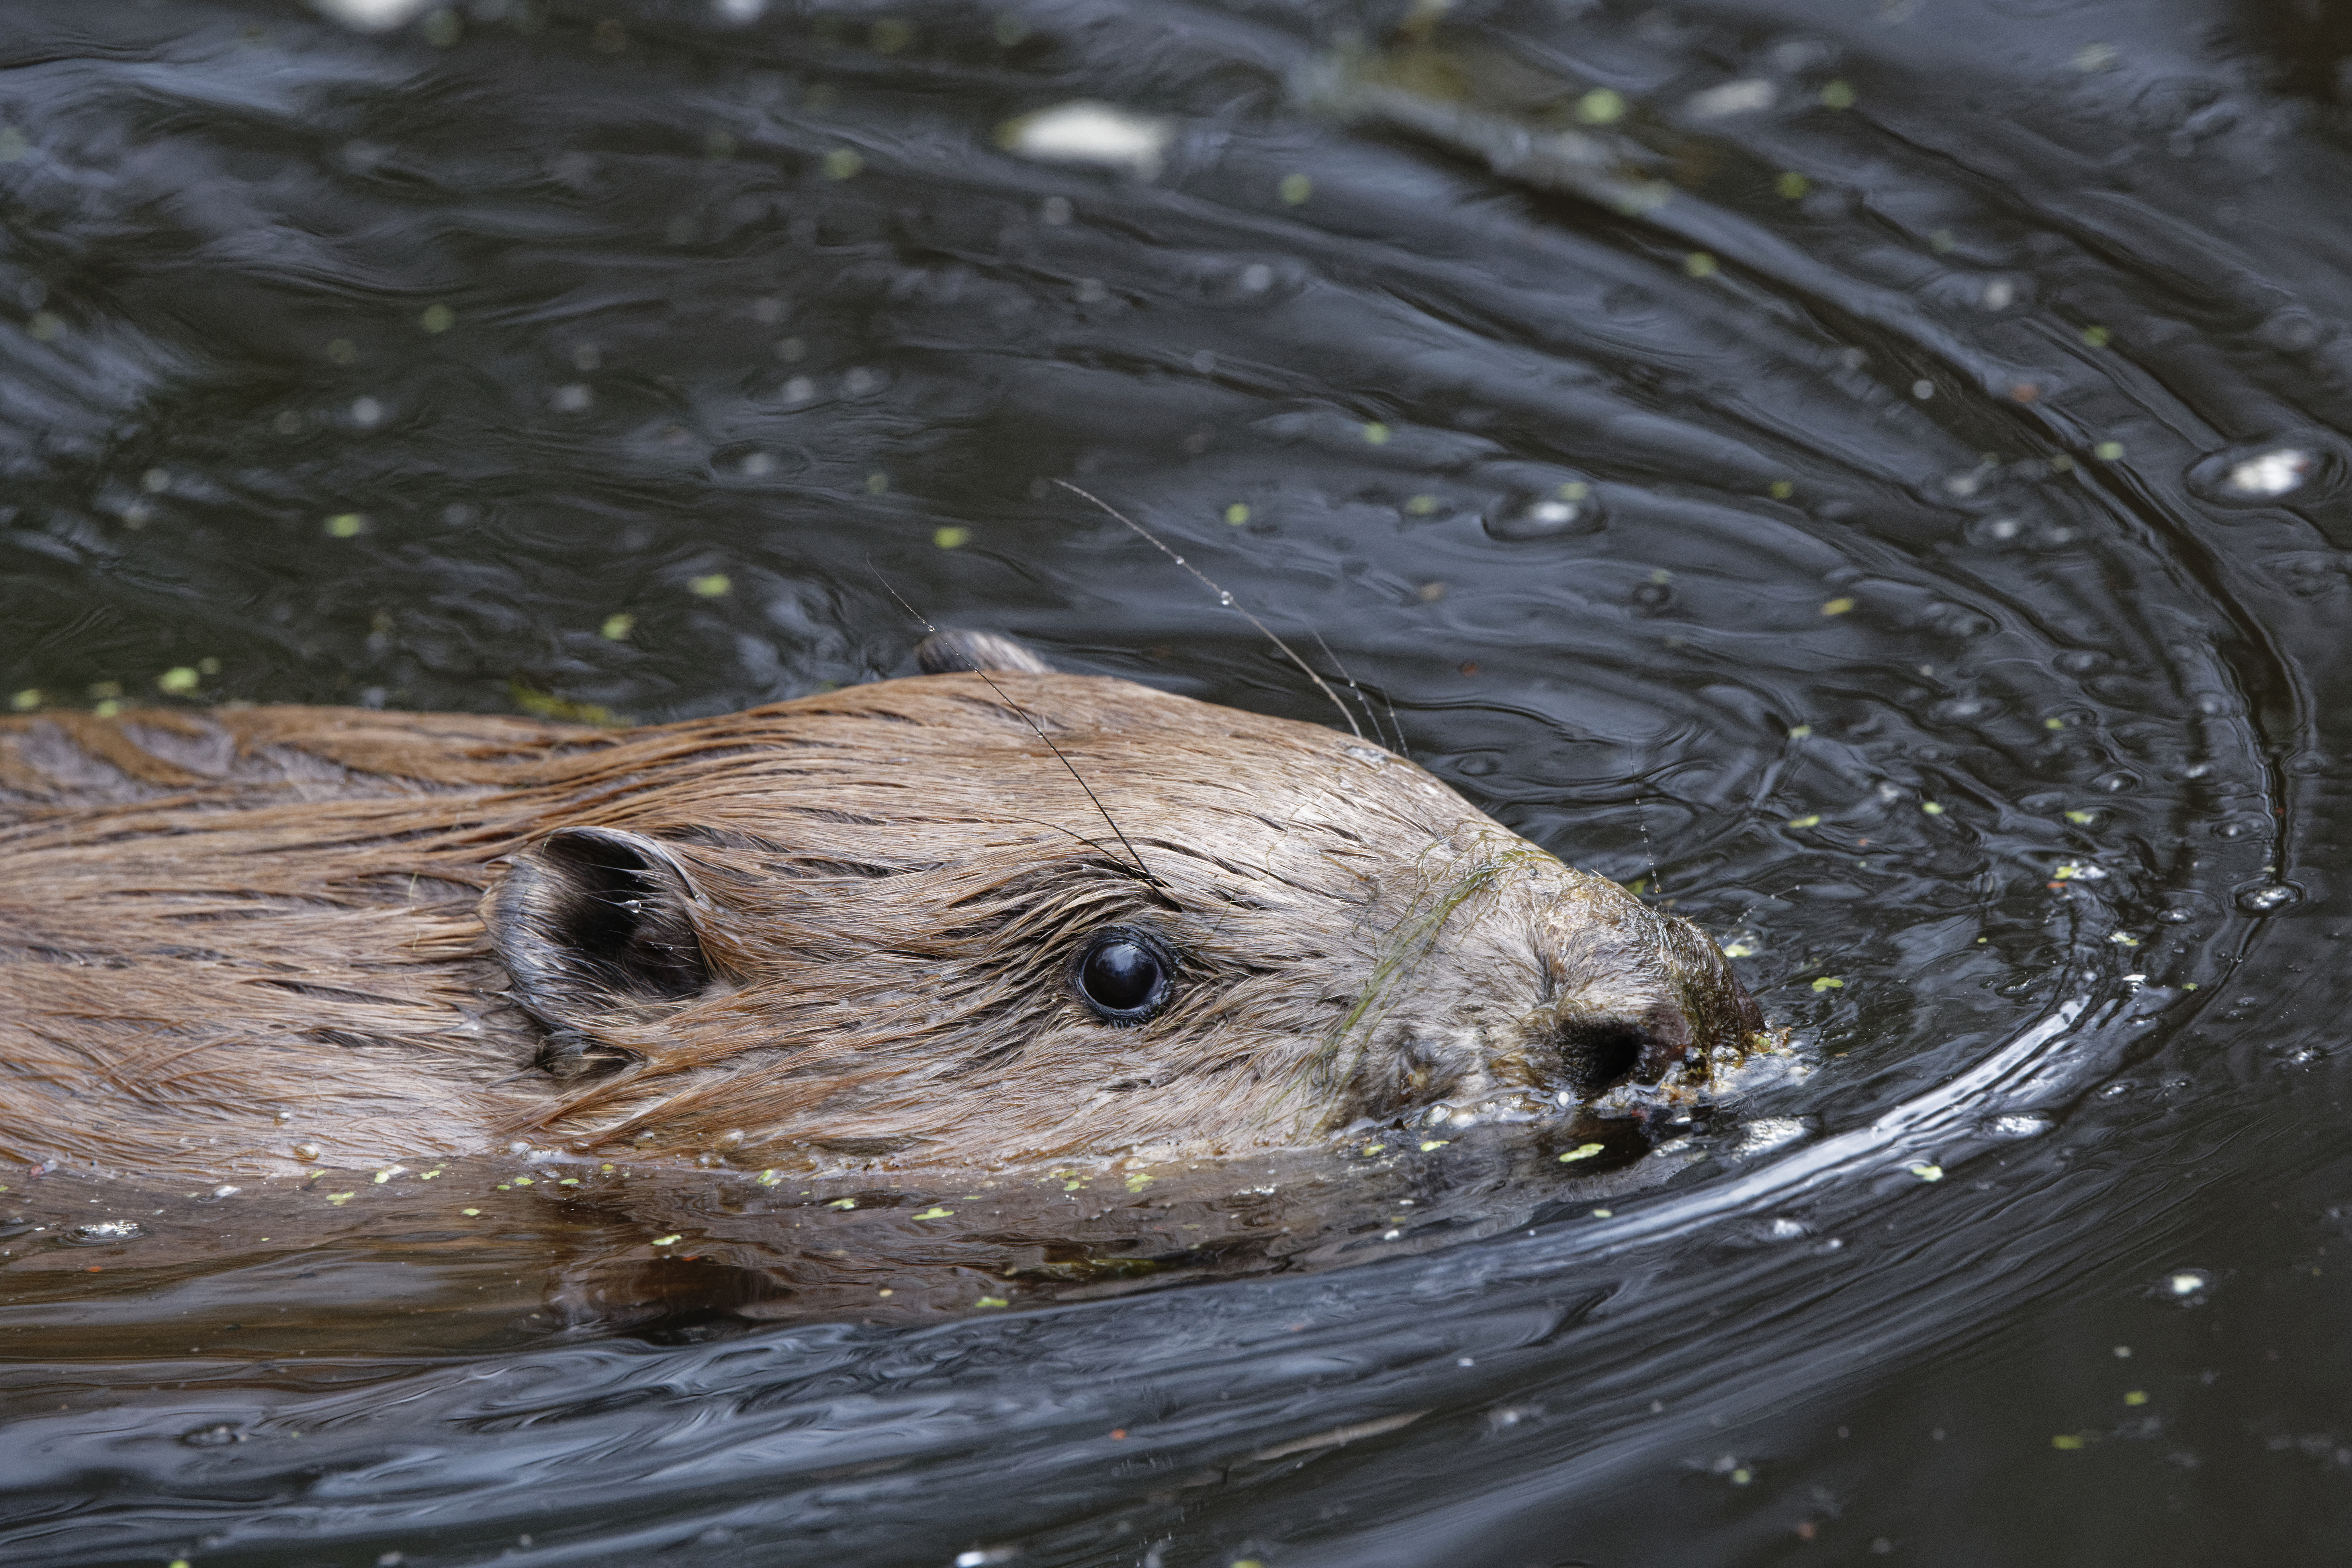 Beaver swimming in its new pond home 